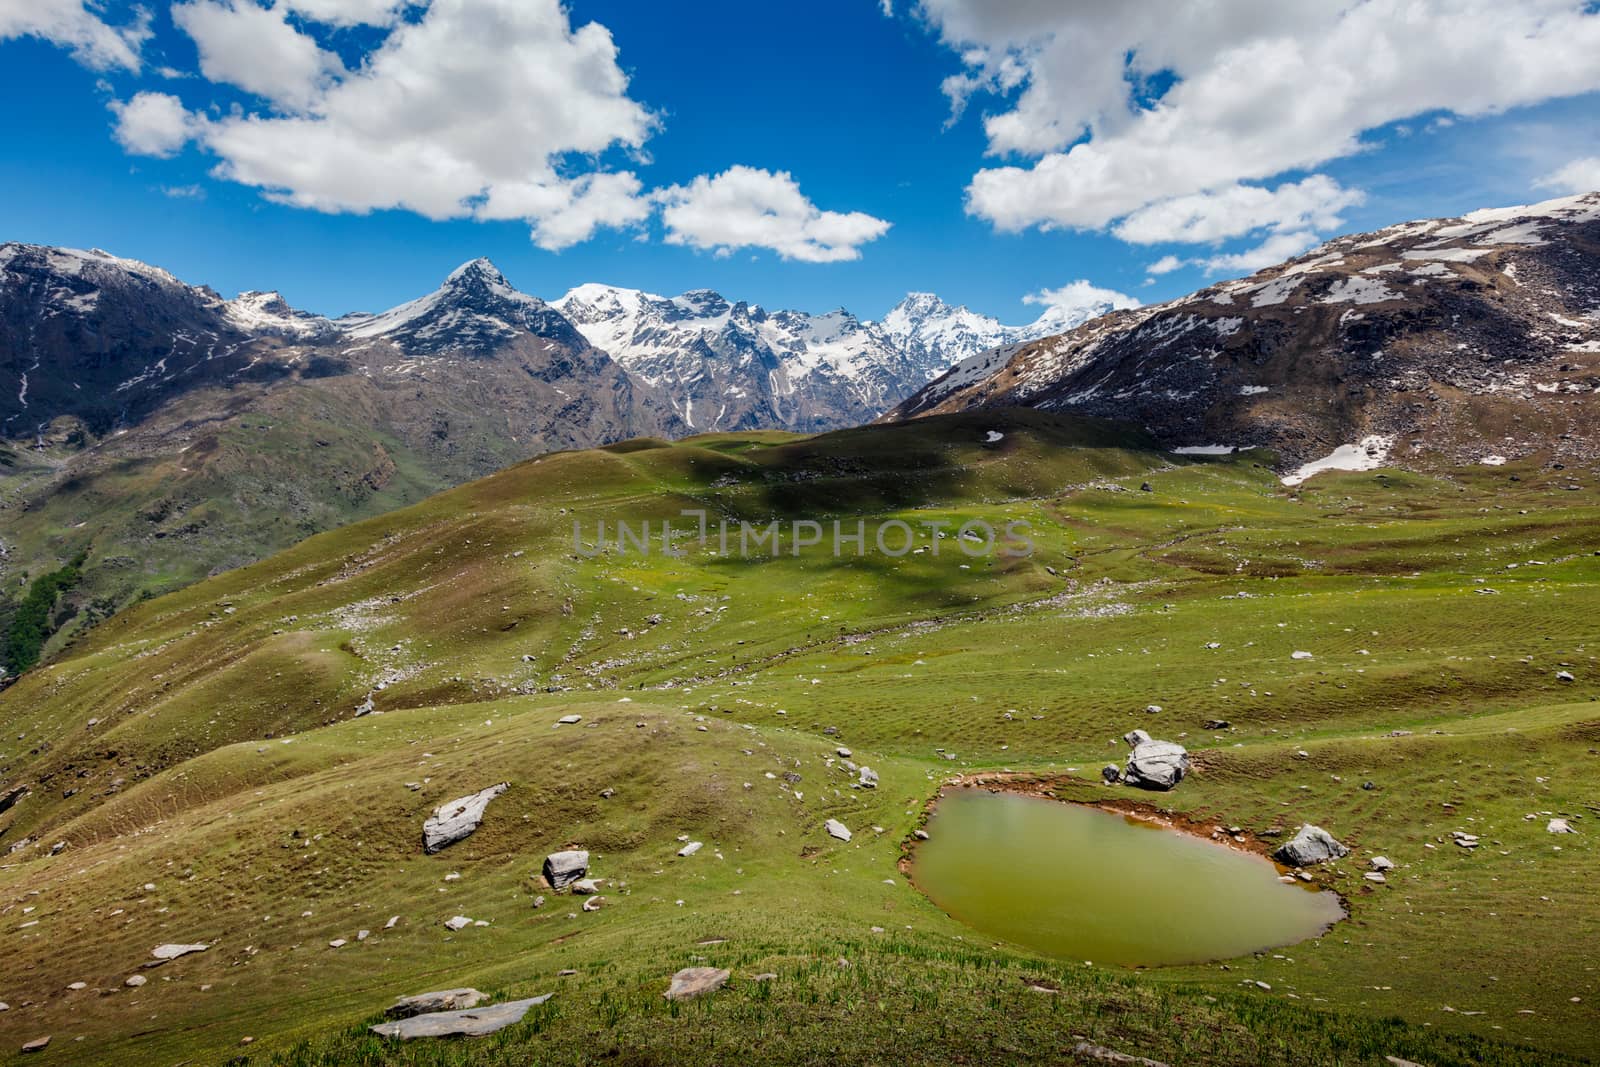 Scenic Indian Himalayan landscape scenery in Himalayas with small lake. Himachal Pradesh, India